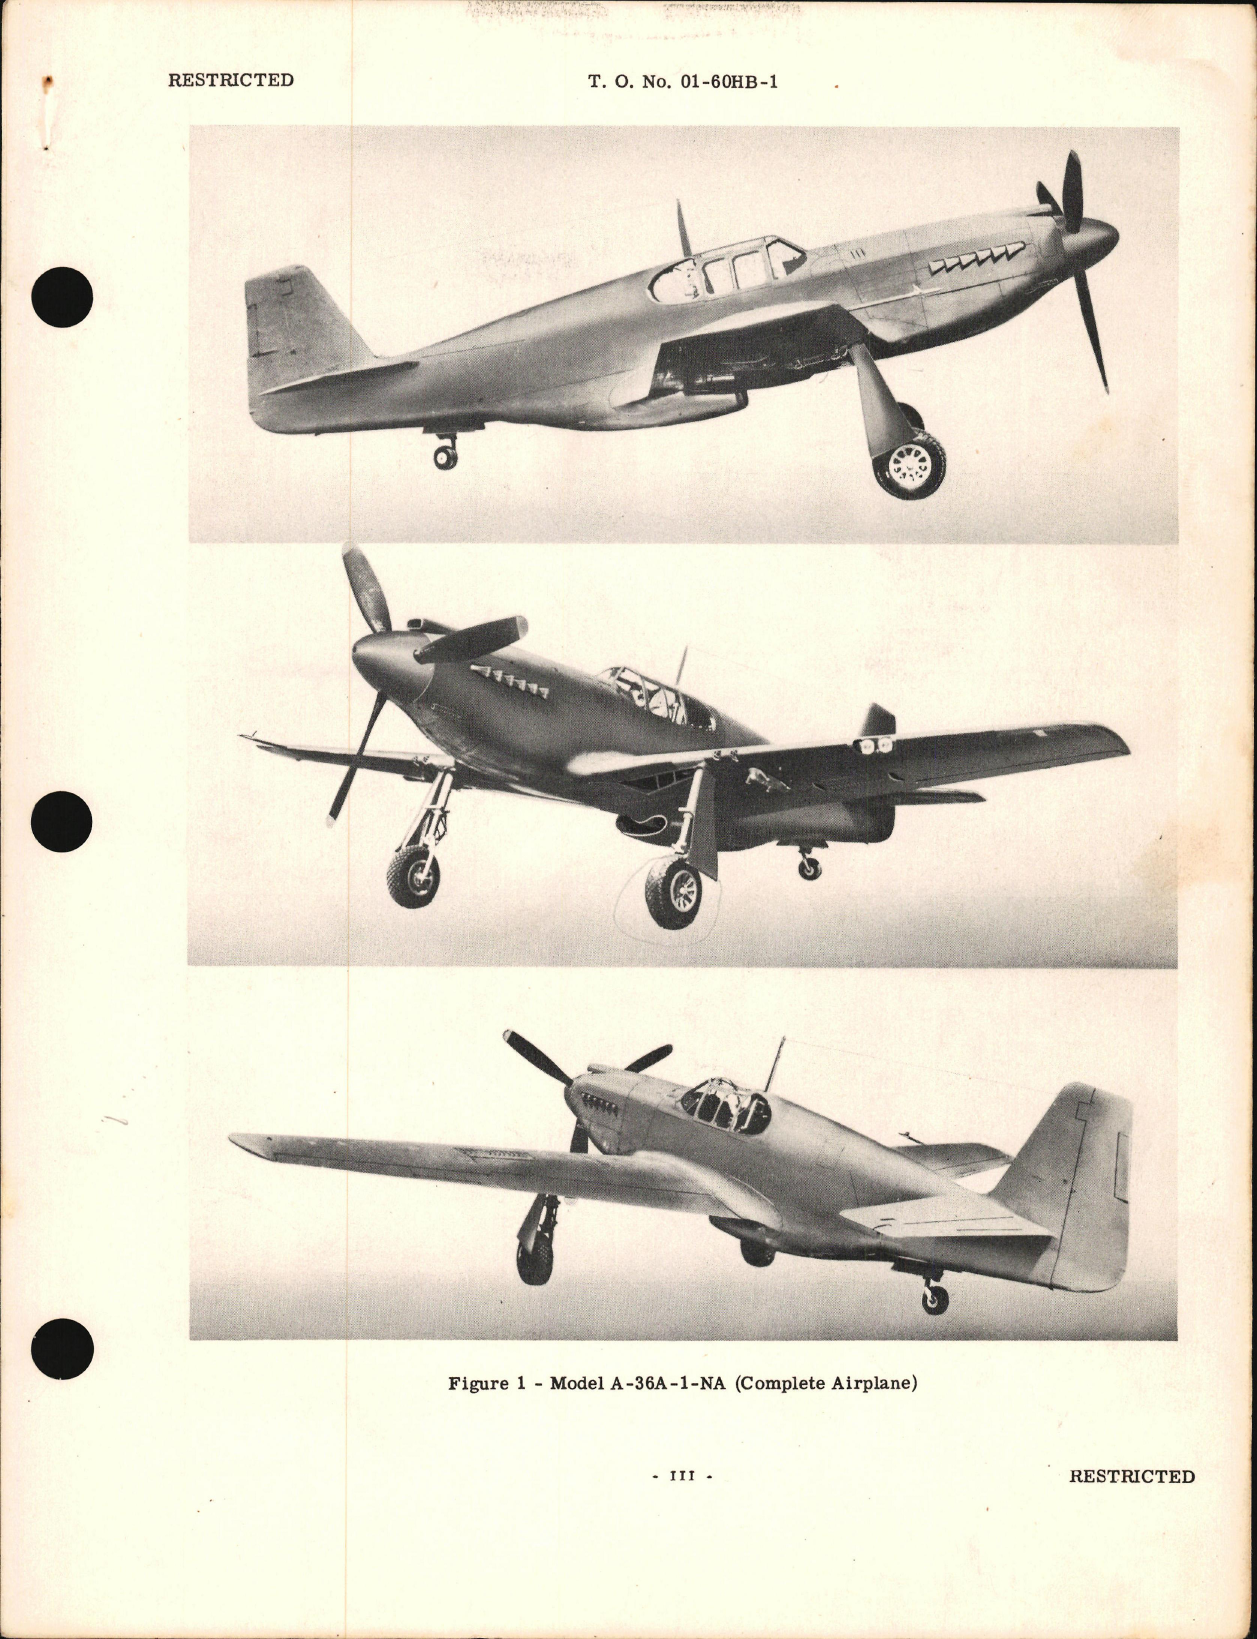 Sample page 5 from AirCorps Library document: Pilot's Flight Operating Instructions for A-36A-1-NA